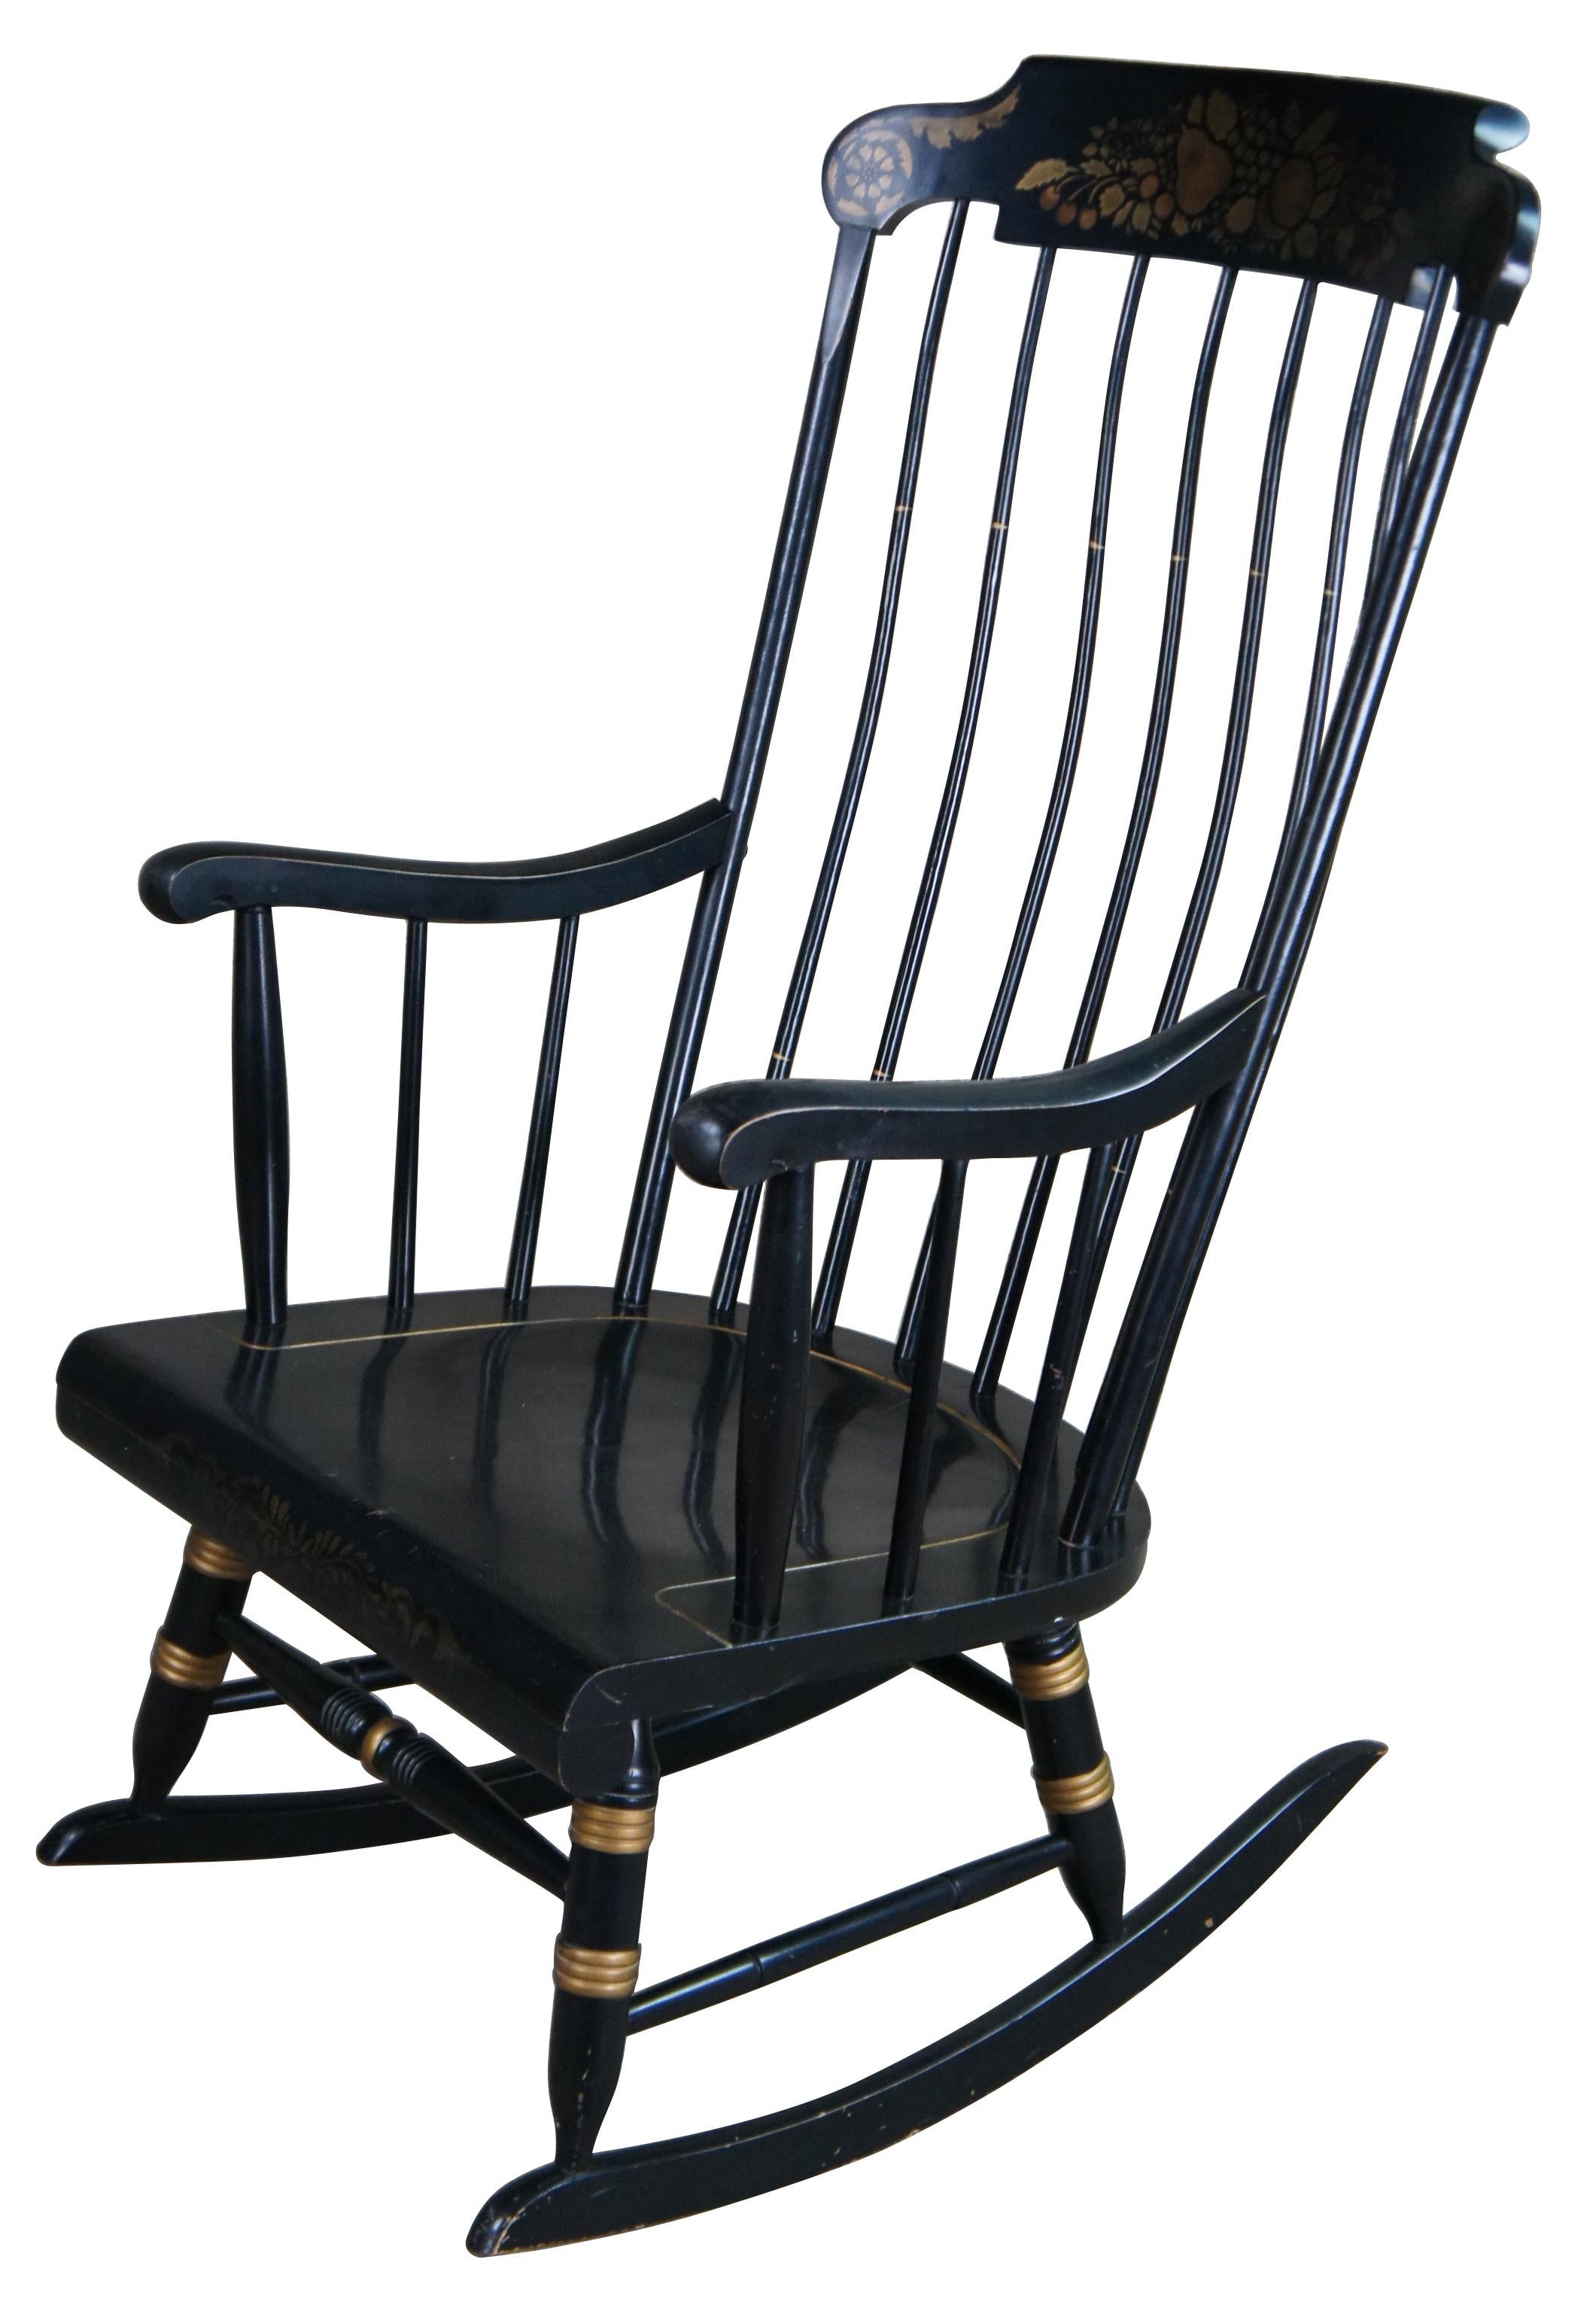 Vintage Nichols & Stone Black Harvest Hitchcock Windsor rocker armchair featuring ebonized finish with gold accents and stenciled fruit. 69 - 6DC.
 